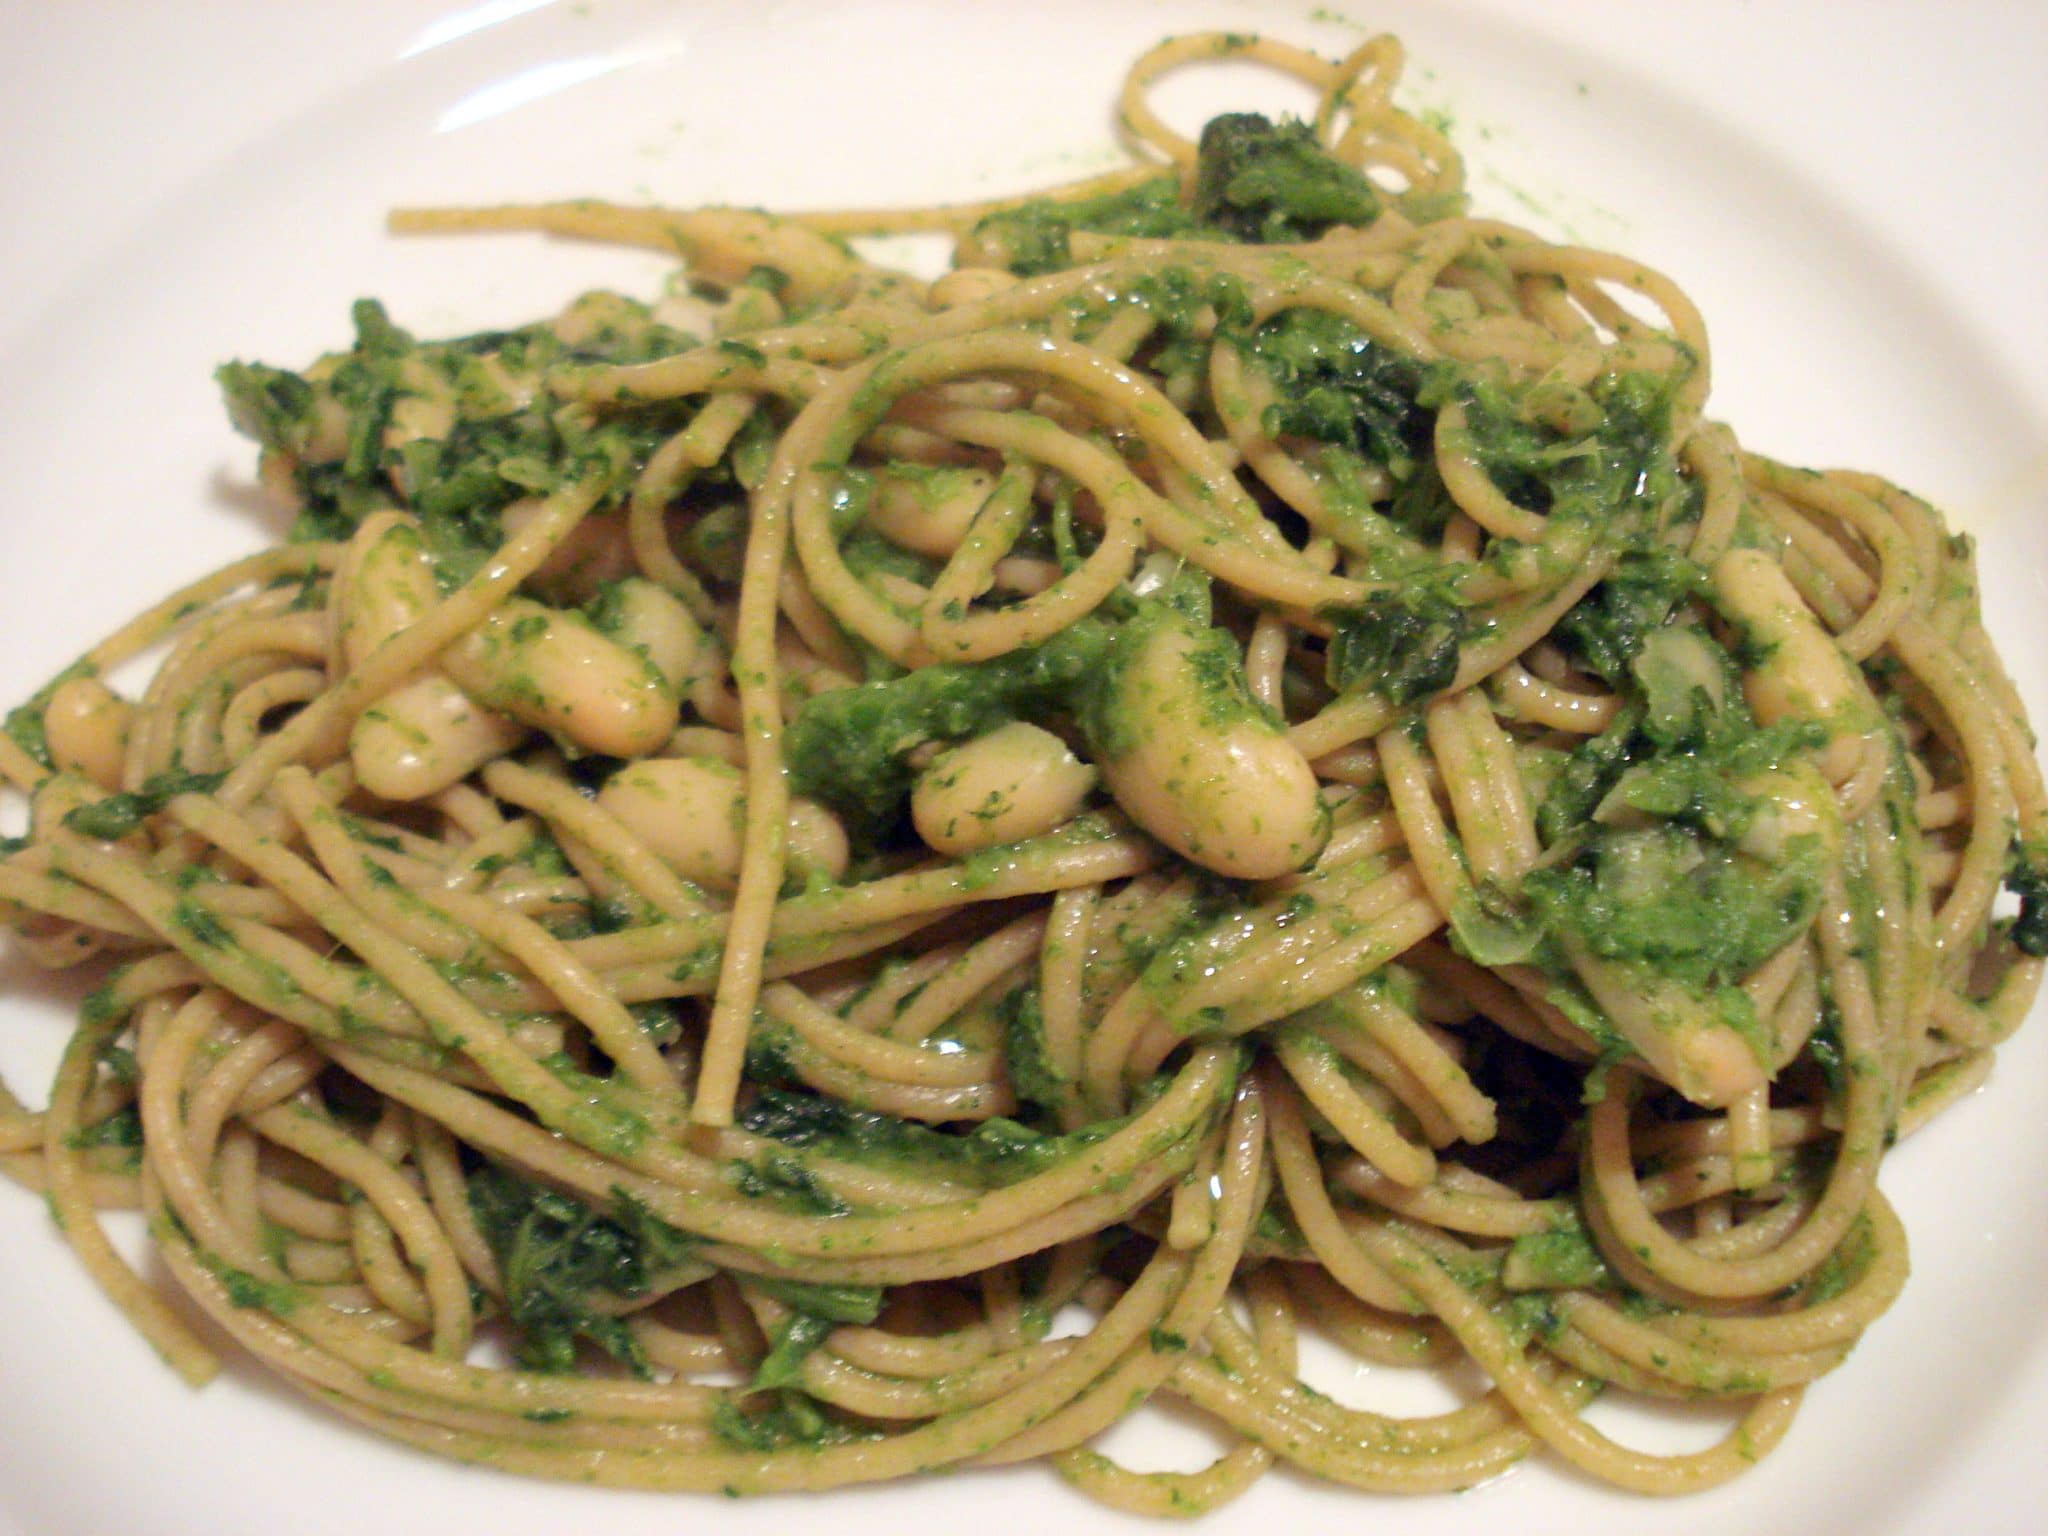 Plate of Tuscan White Beans and Broccoli Rabe